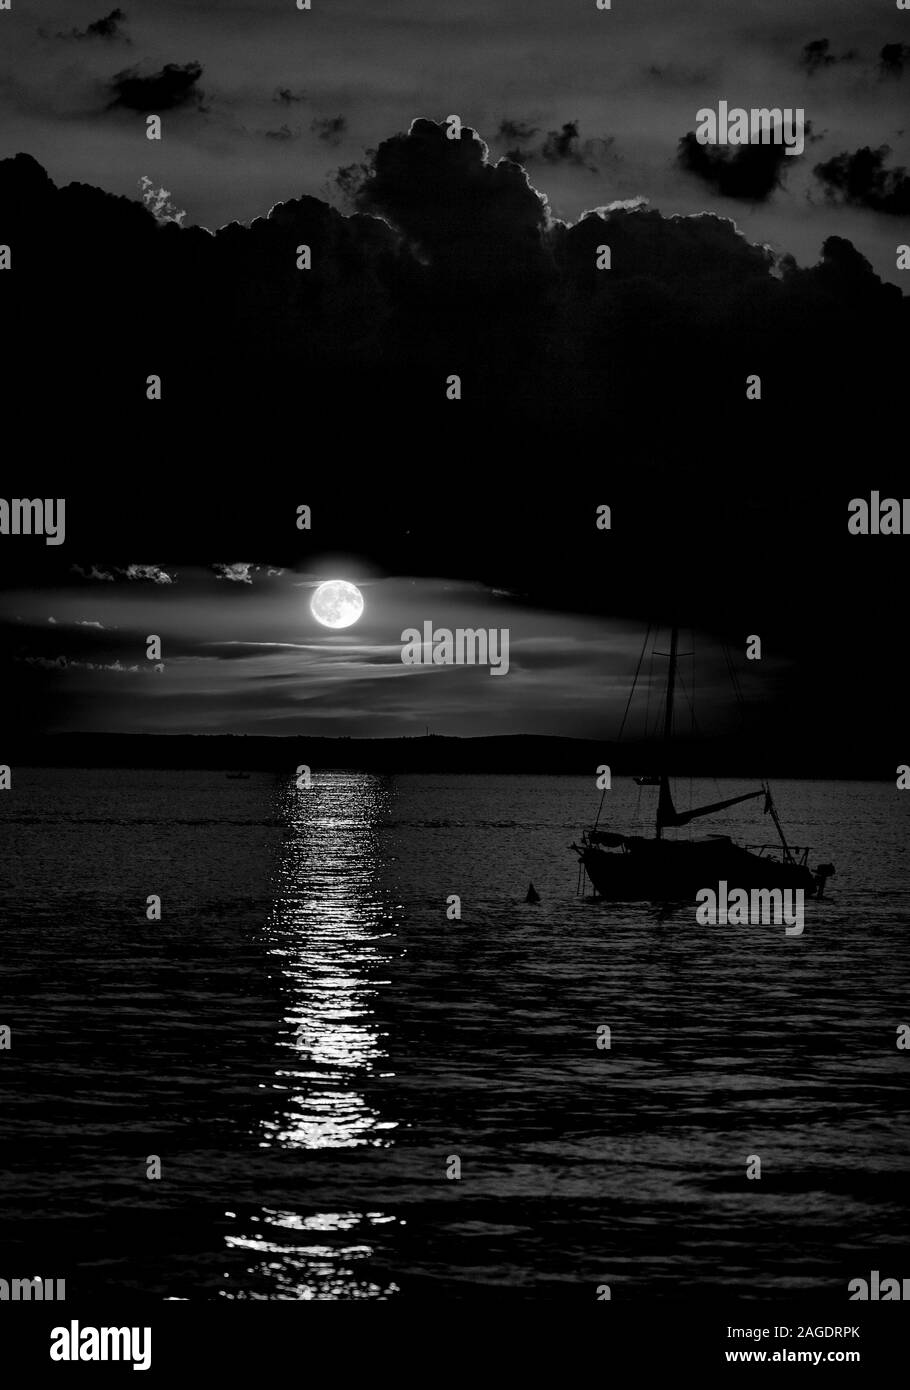 Greyscale Shot Of A Ship In The Sea Under The Dark Cloudy Sky With The